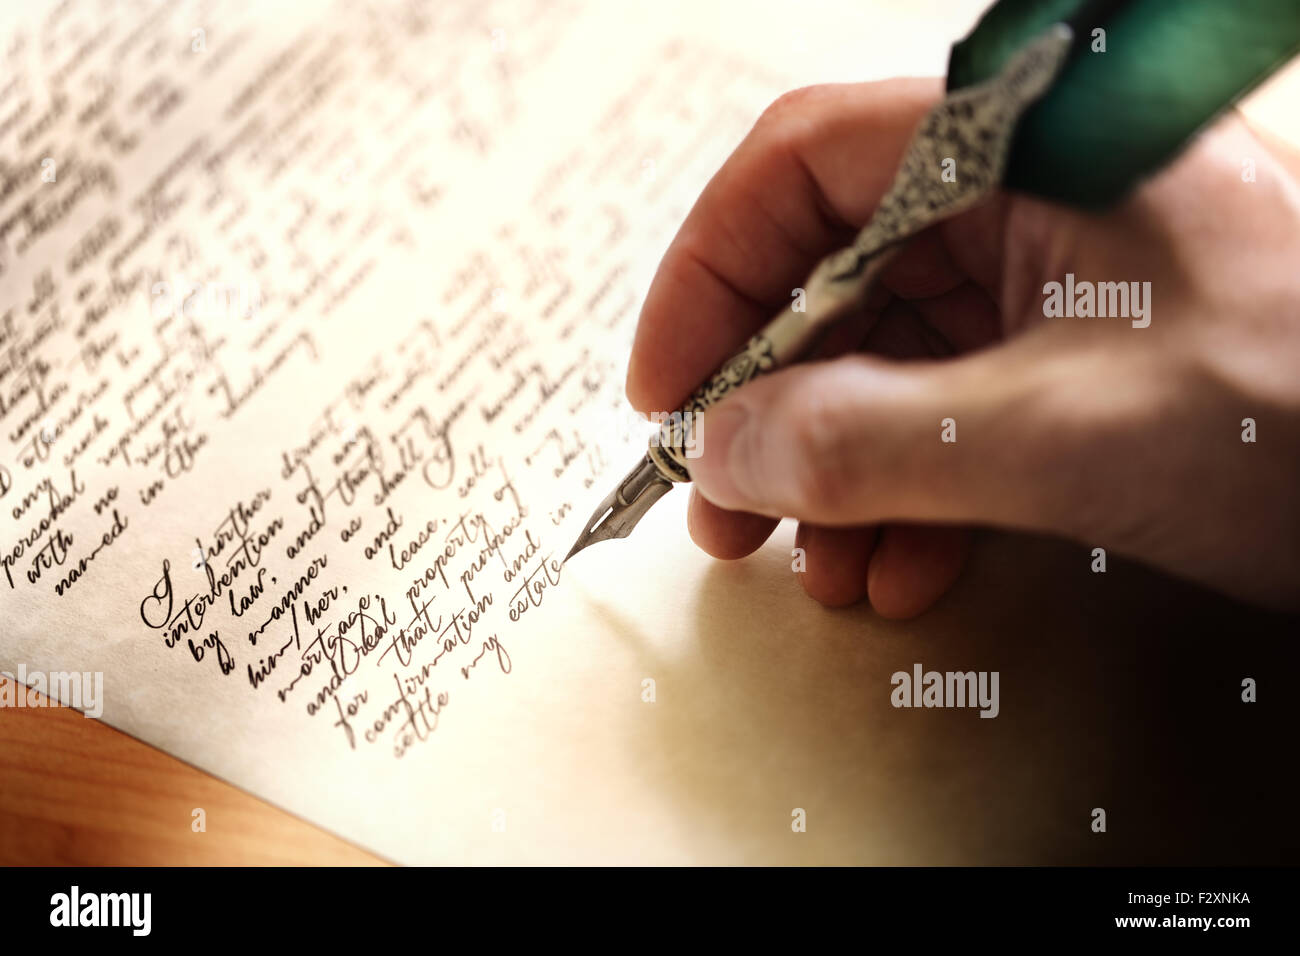 Writing with quill pen Stock Photo